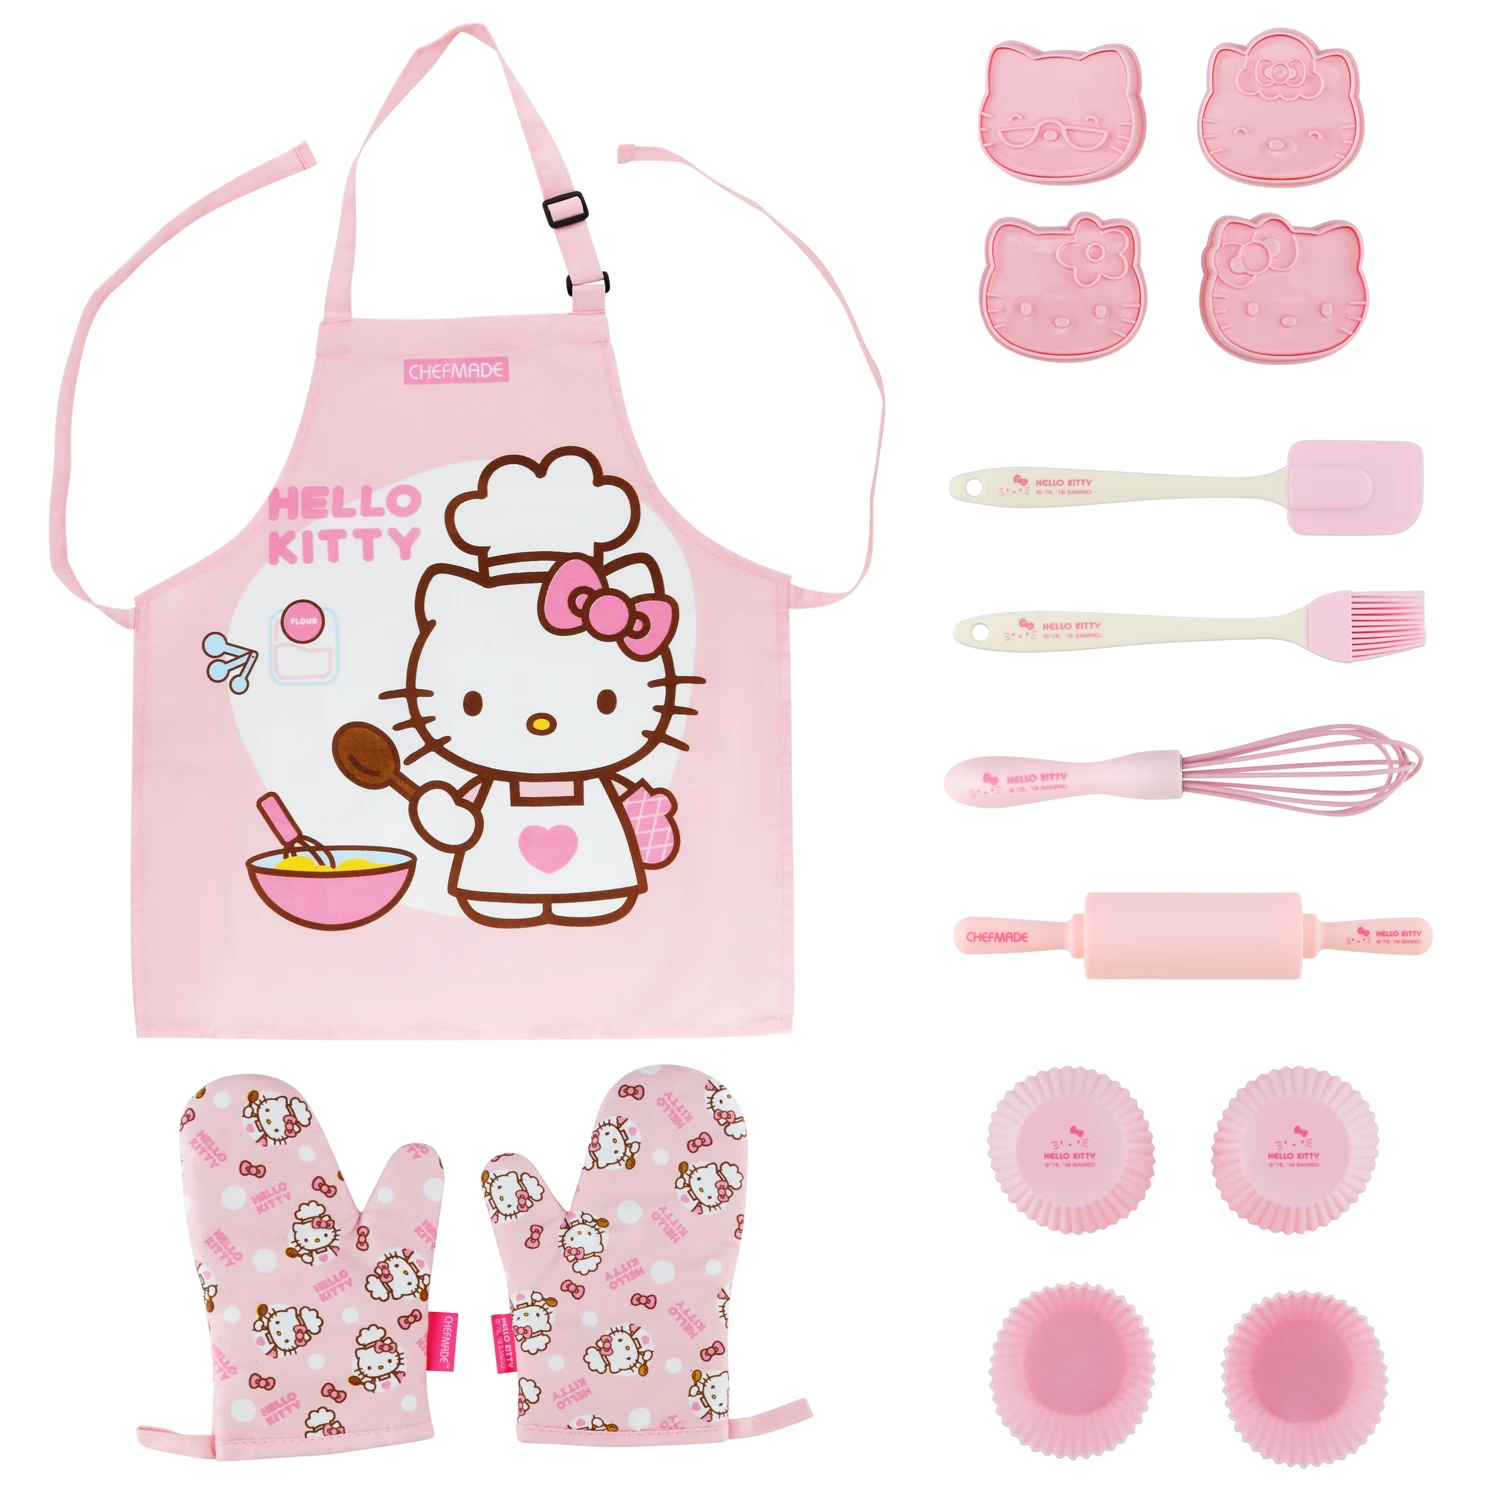 

CHEFMADE Kitchen Tool Apron Oven Mitt Pastry Brush Spatula Rolling Pin Muffin Pan Whisk Biscuit Moule Kids Baking Set, Pink